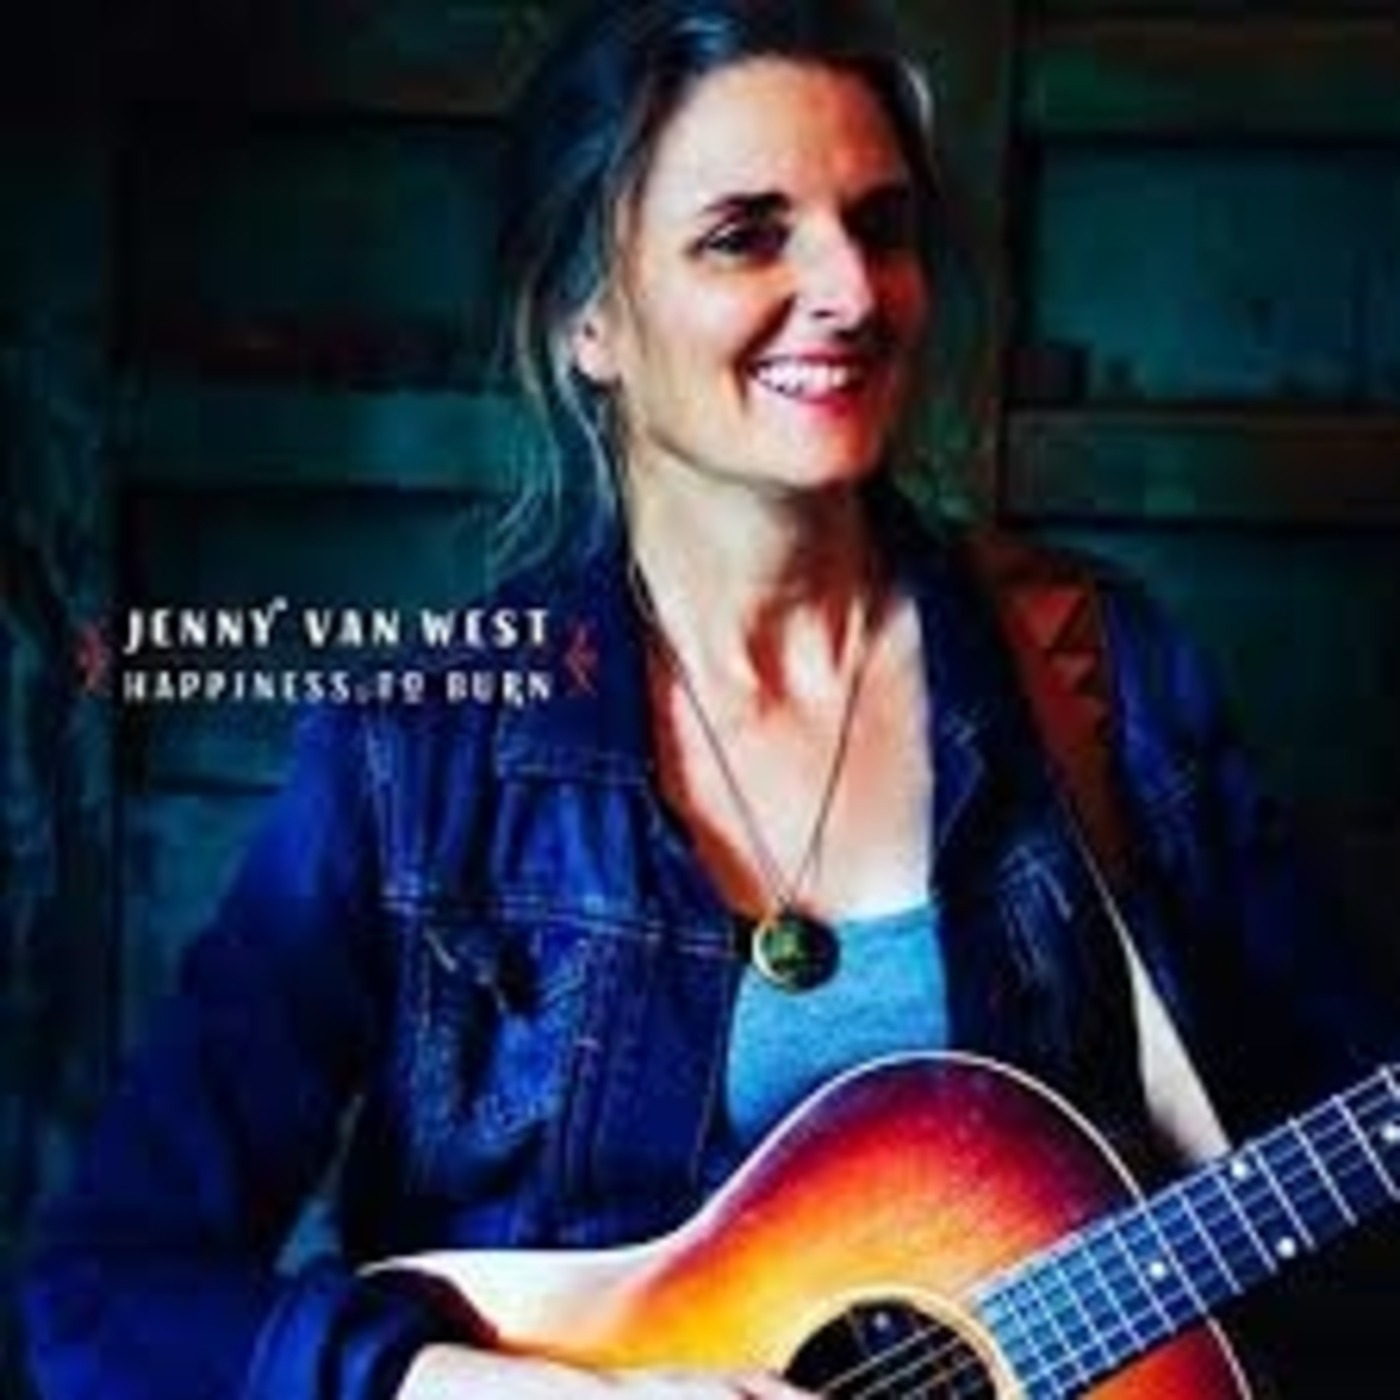 Live In A New Way by Jenny Van West